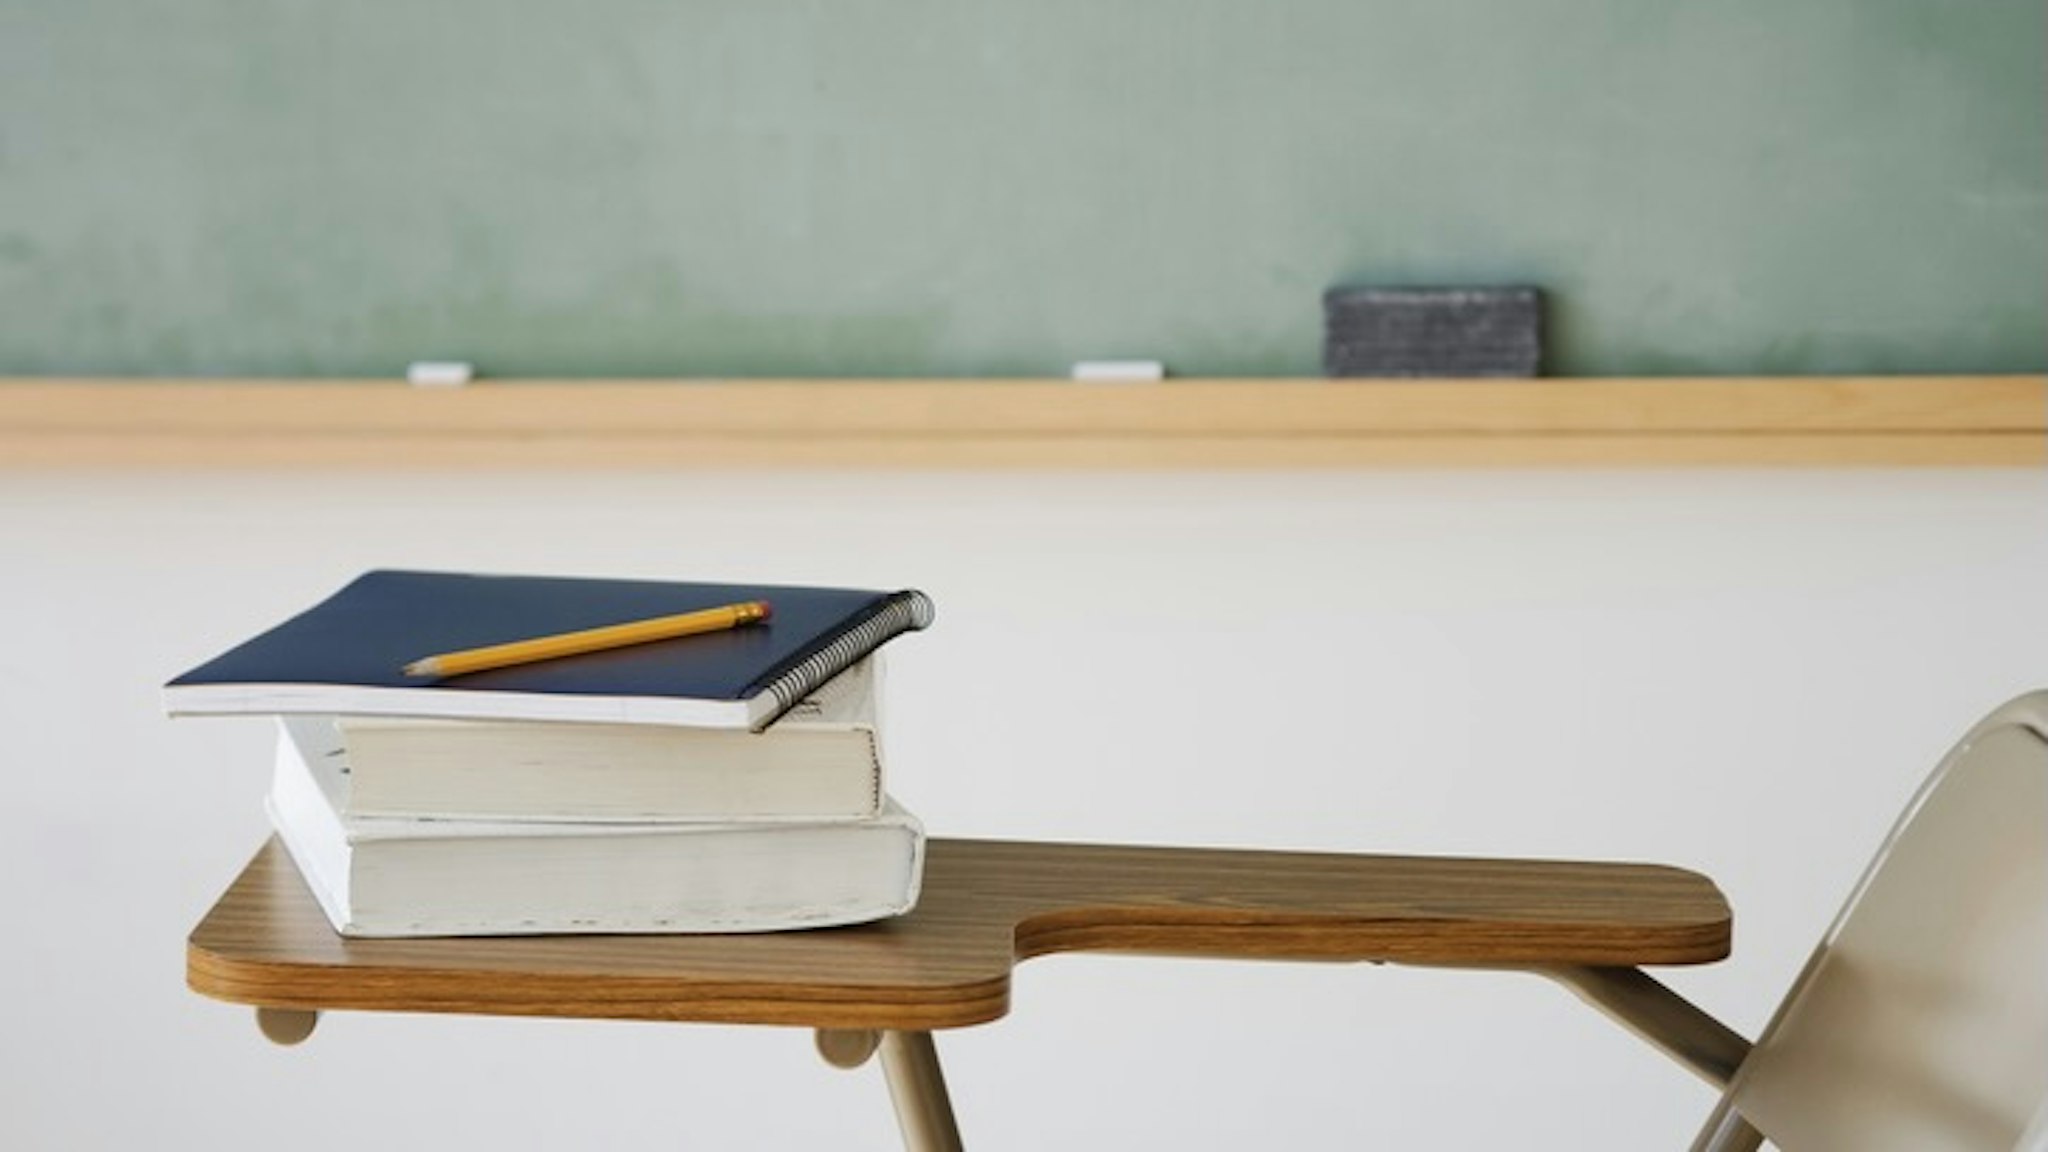 Books and pencil on desk in classroom - stock photo